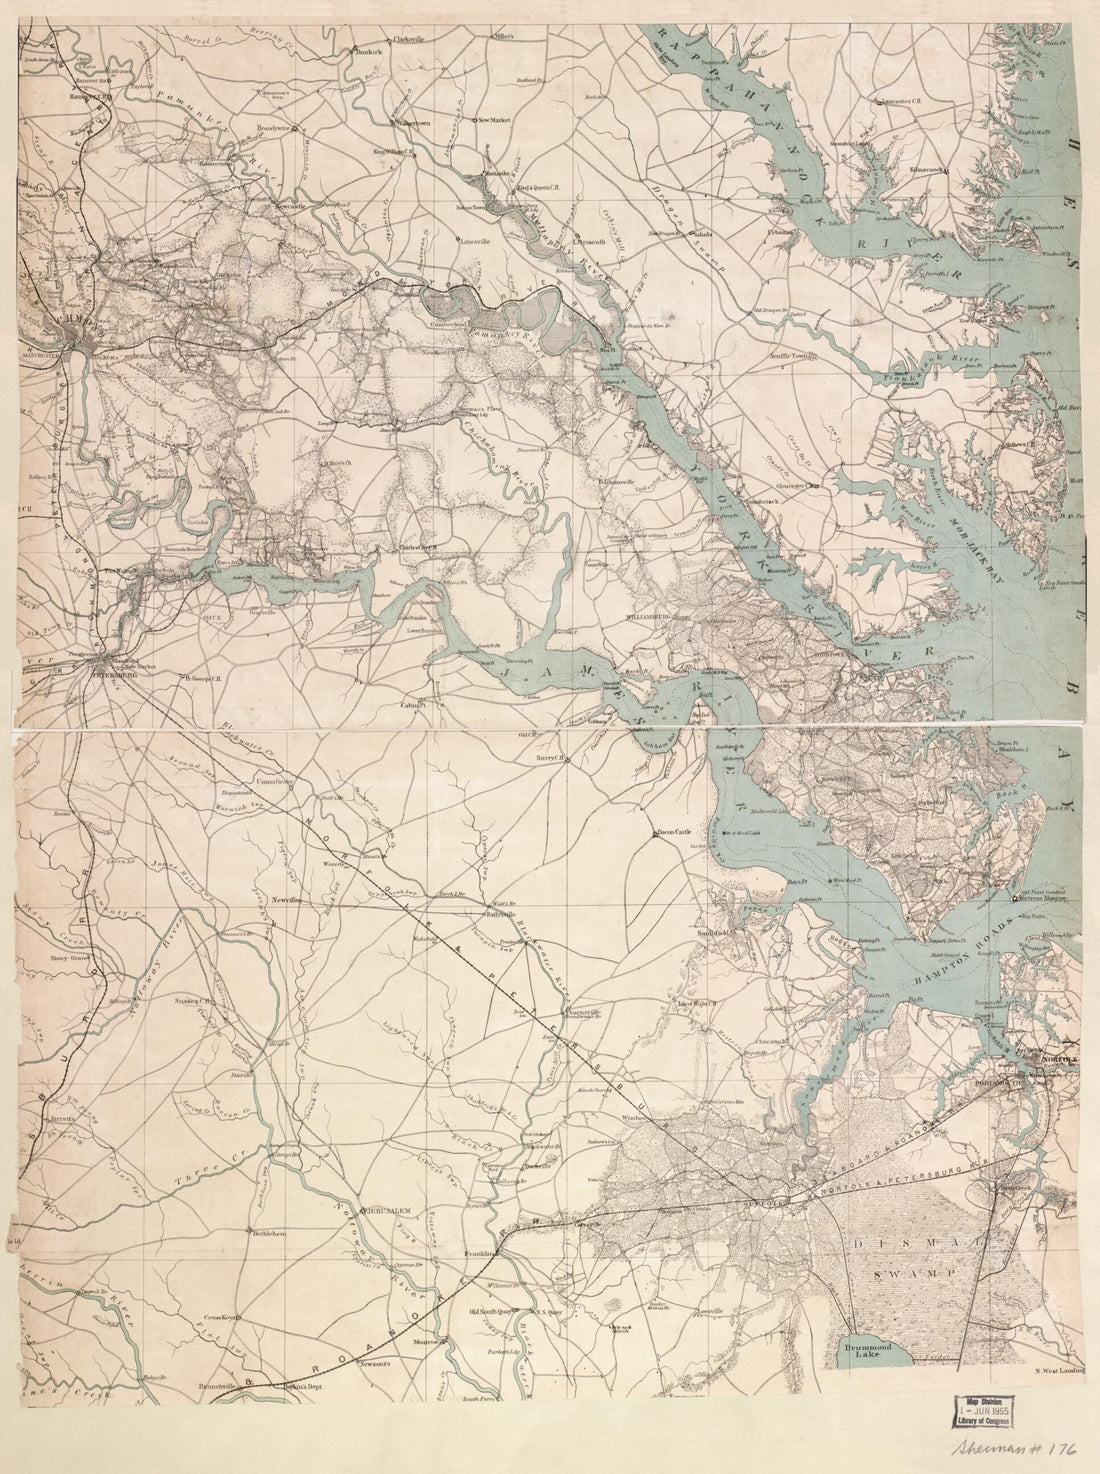 This old map of Eastern Virginia from 1862 was created by Joseph R. (Joseph Roswell) Hawley, Charles G. Krebs, A. Lindenkohl, H. (Henry) Lindenkohl,  U.S. Coast and Geodetic Survey in 1862